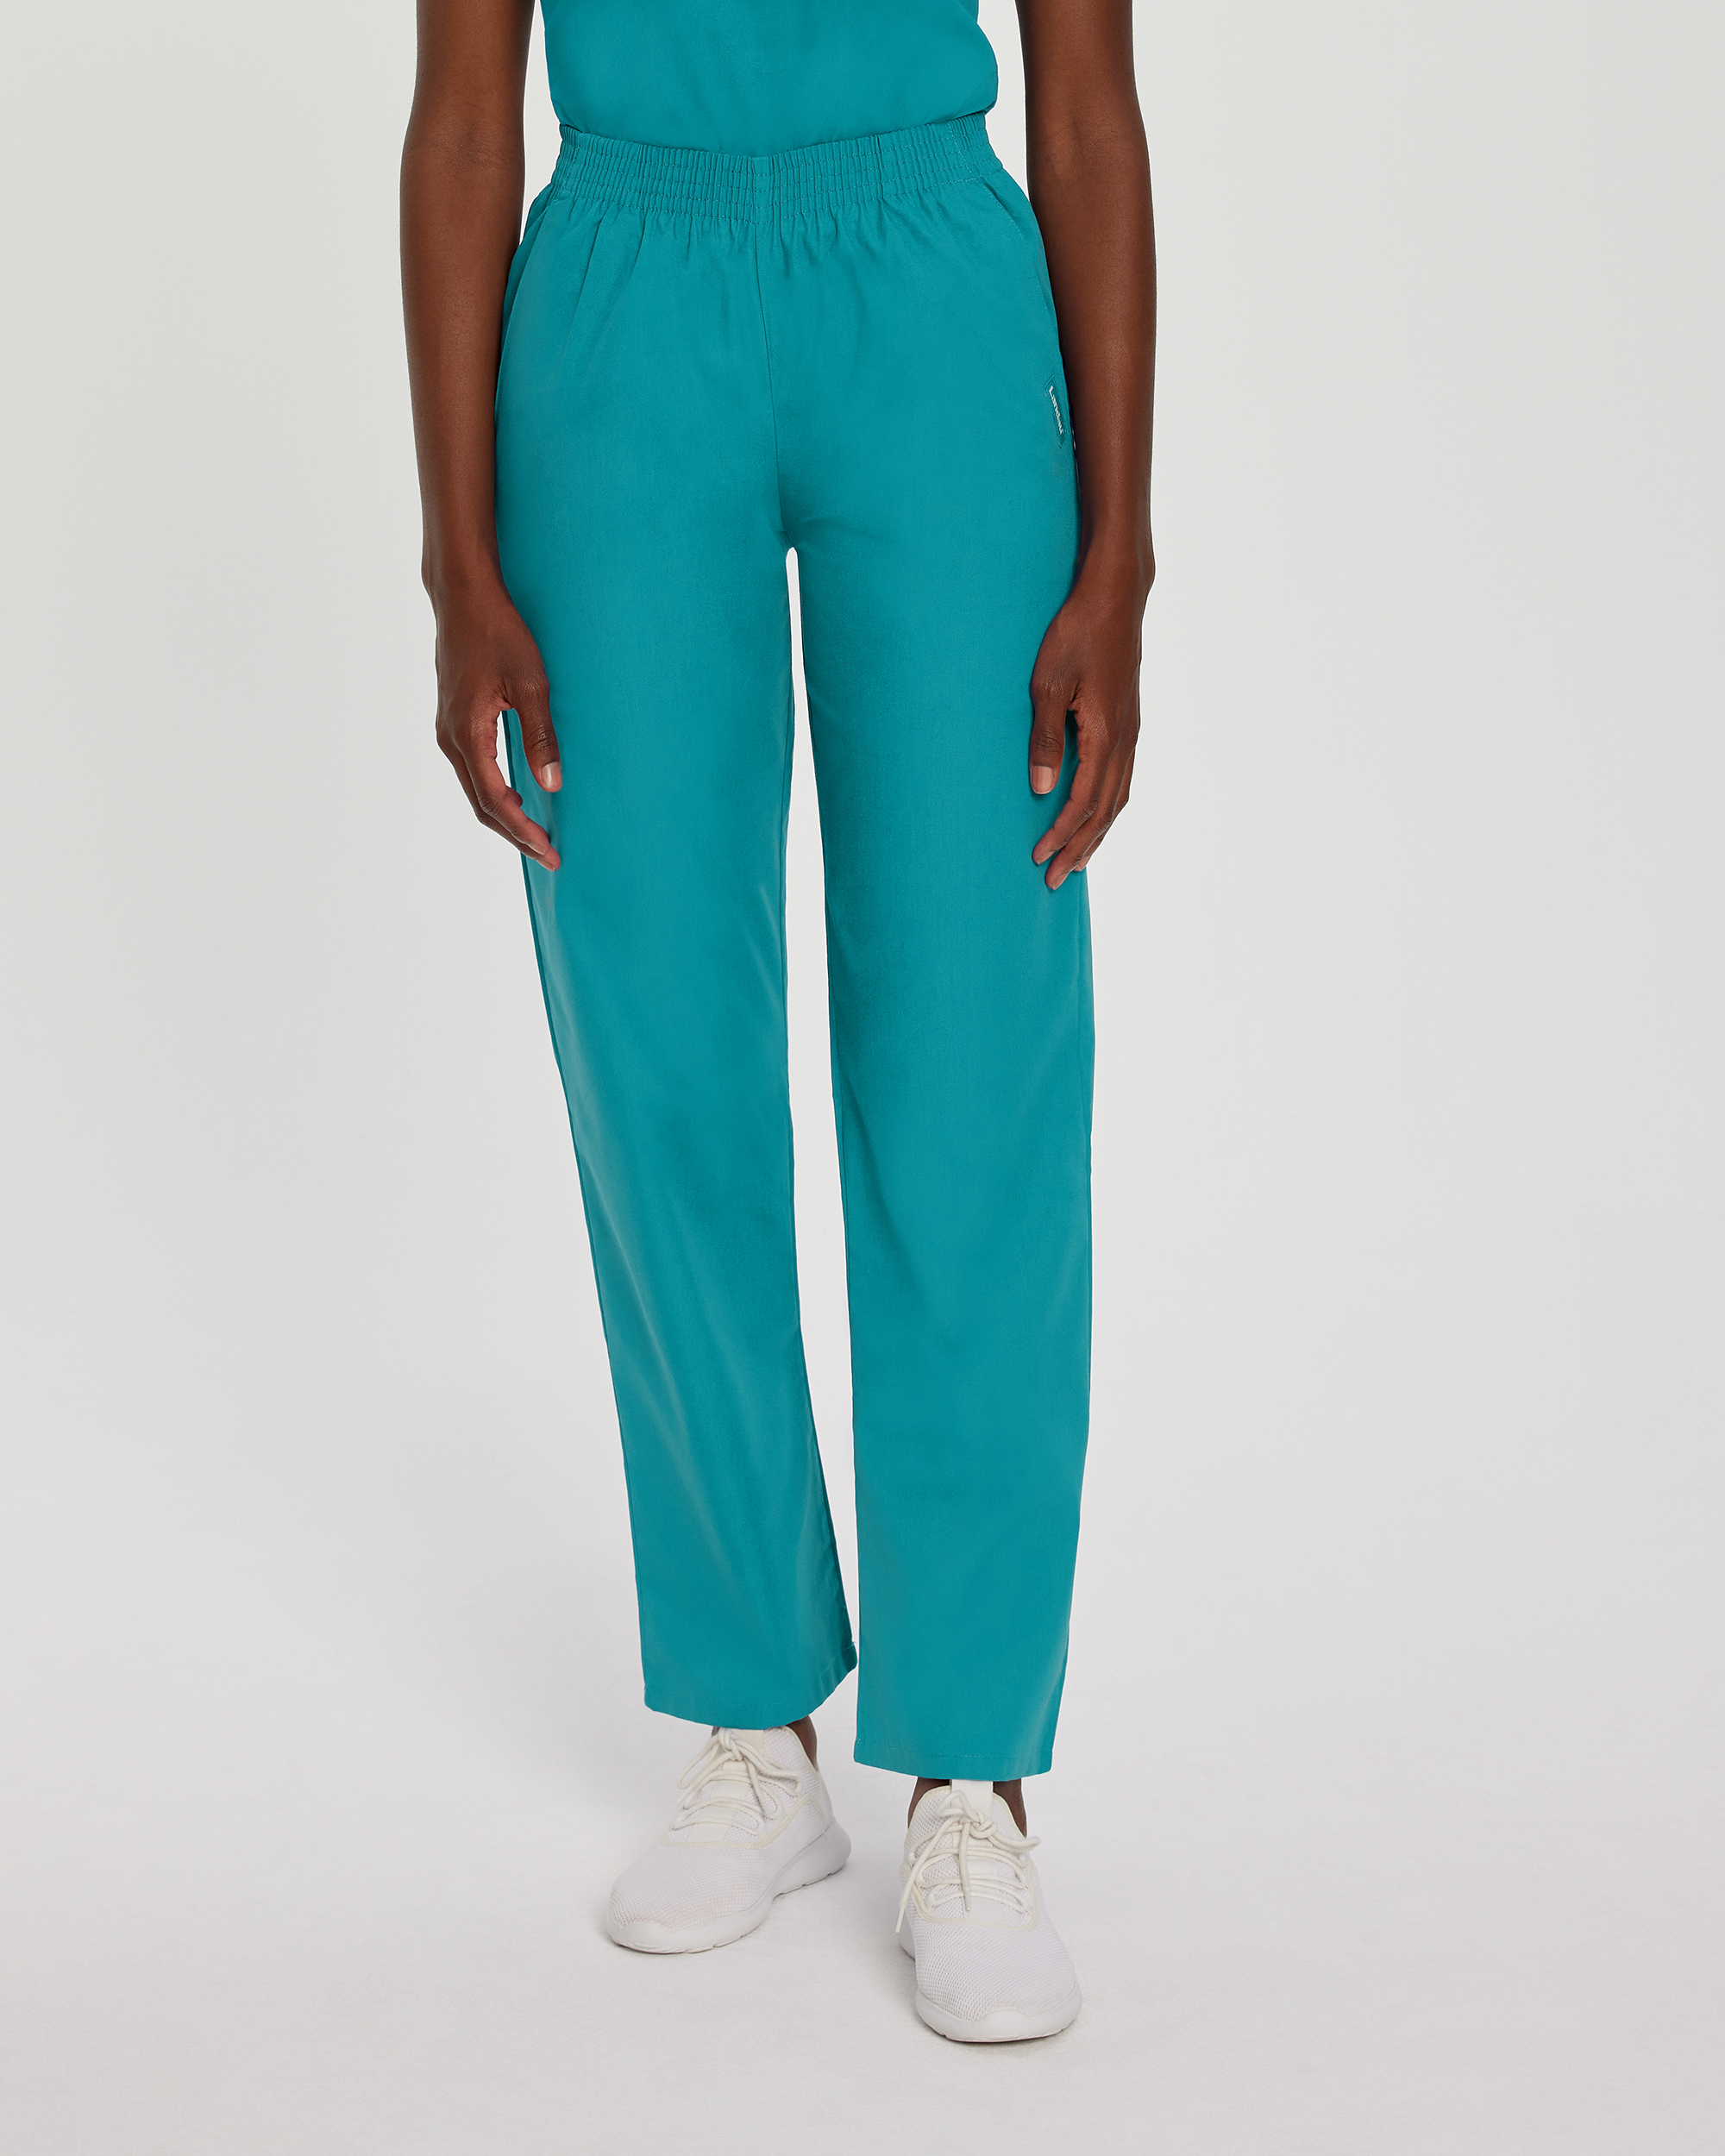 What are the care instructions for these scrub pants?